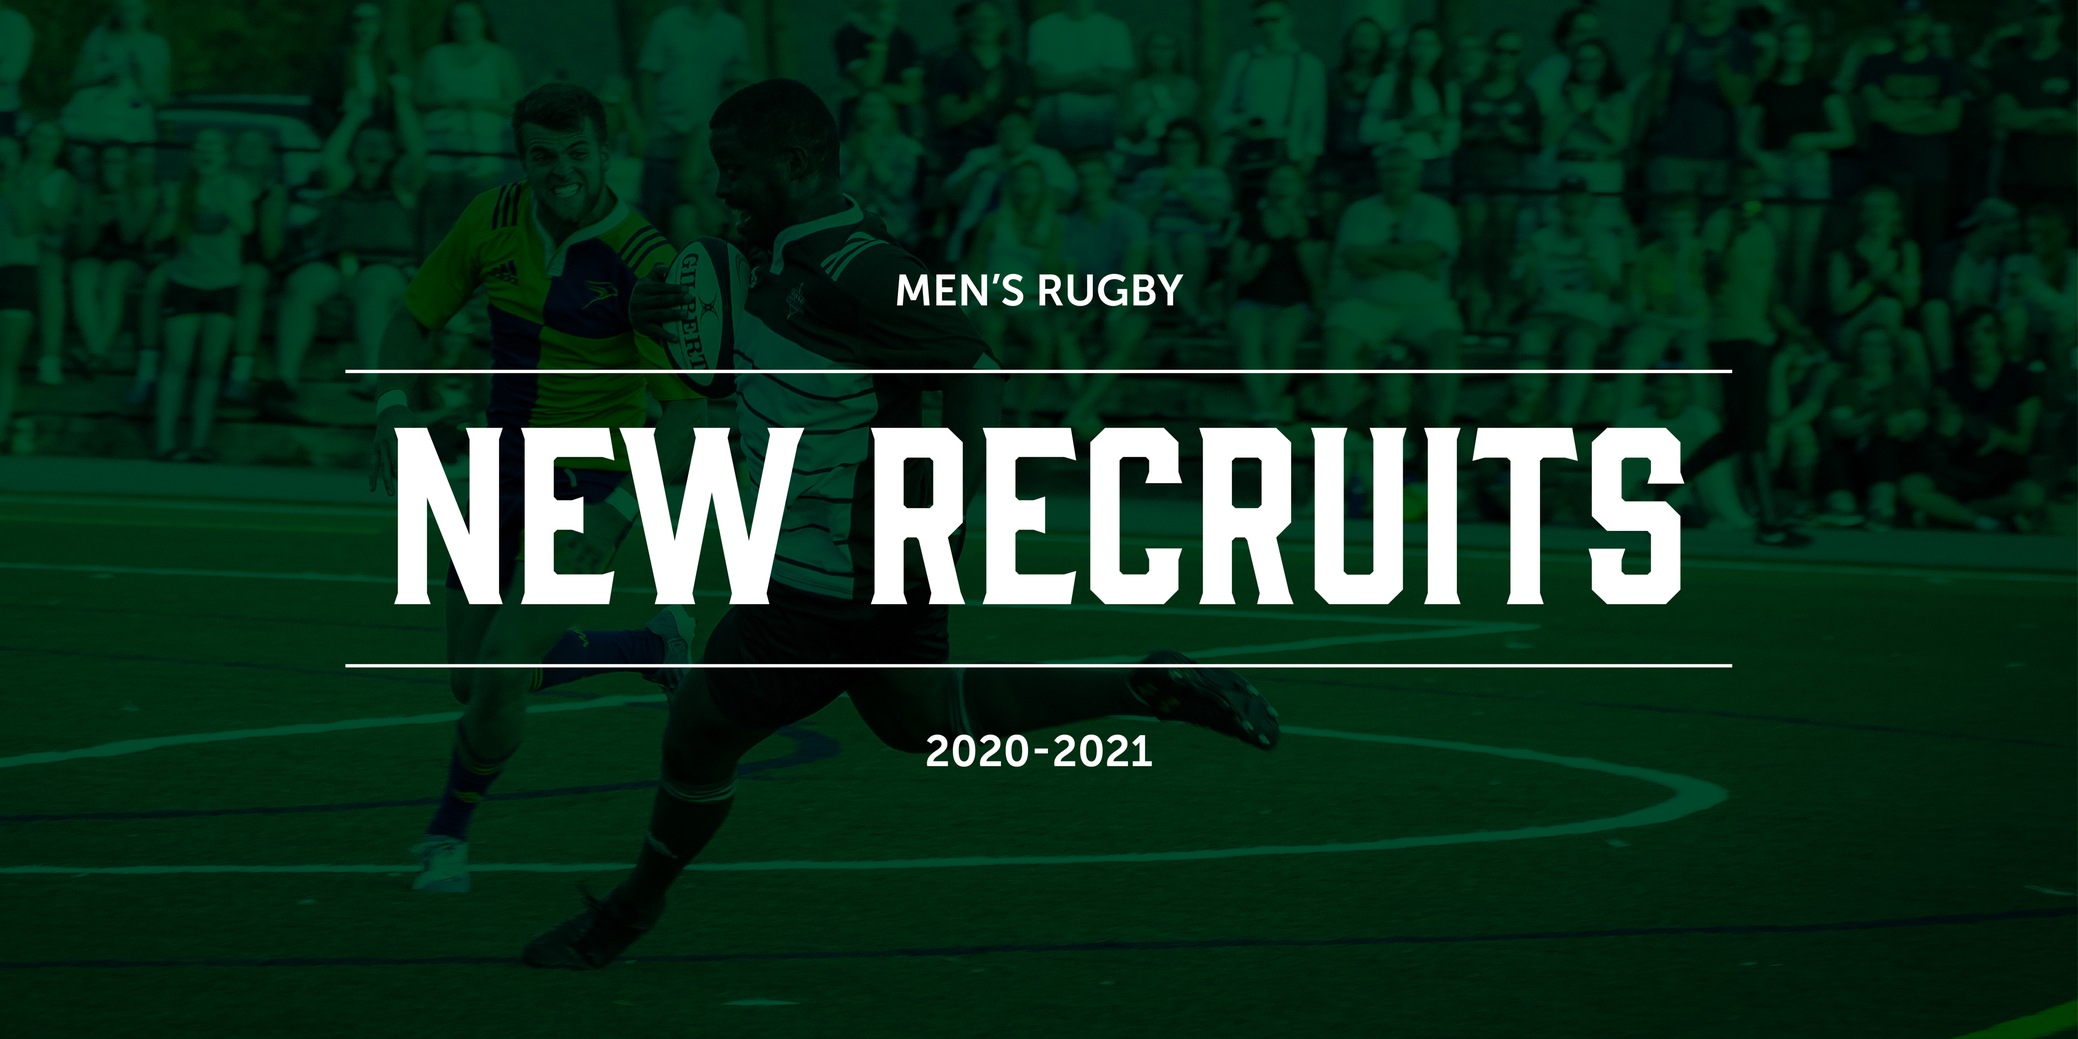 Men's Rugby New Recruits 2020-2021